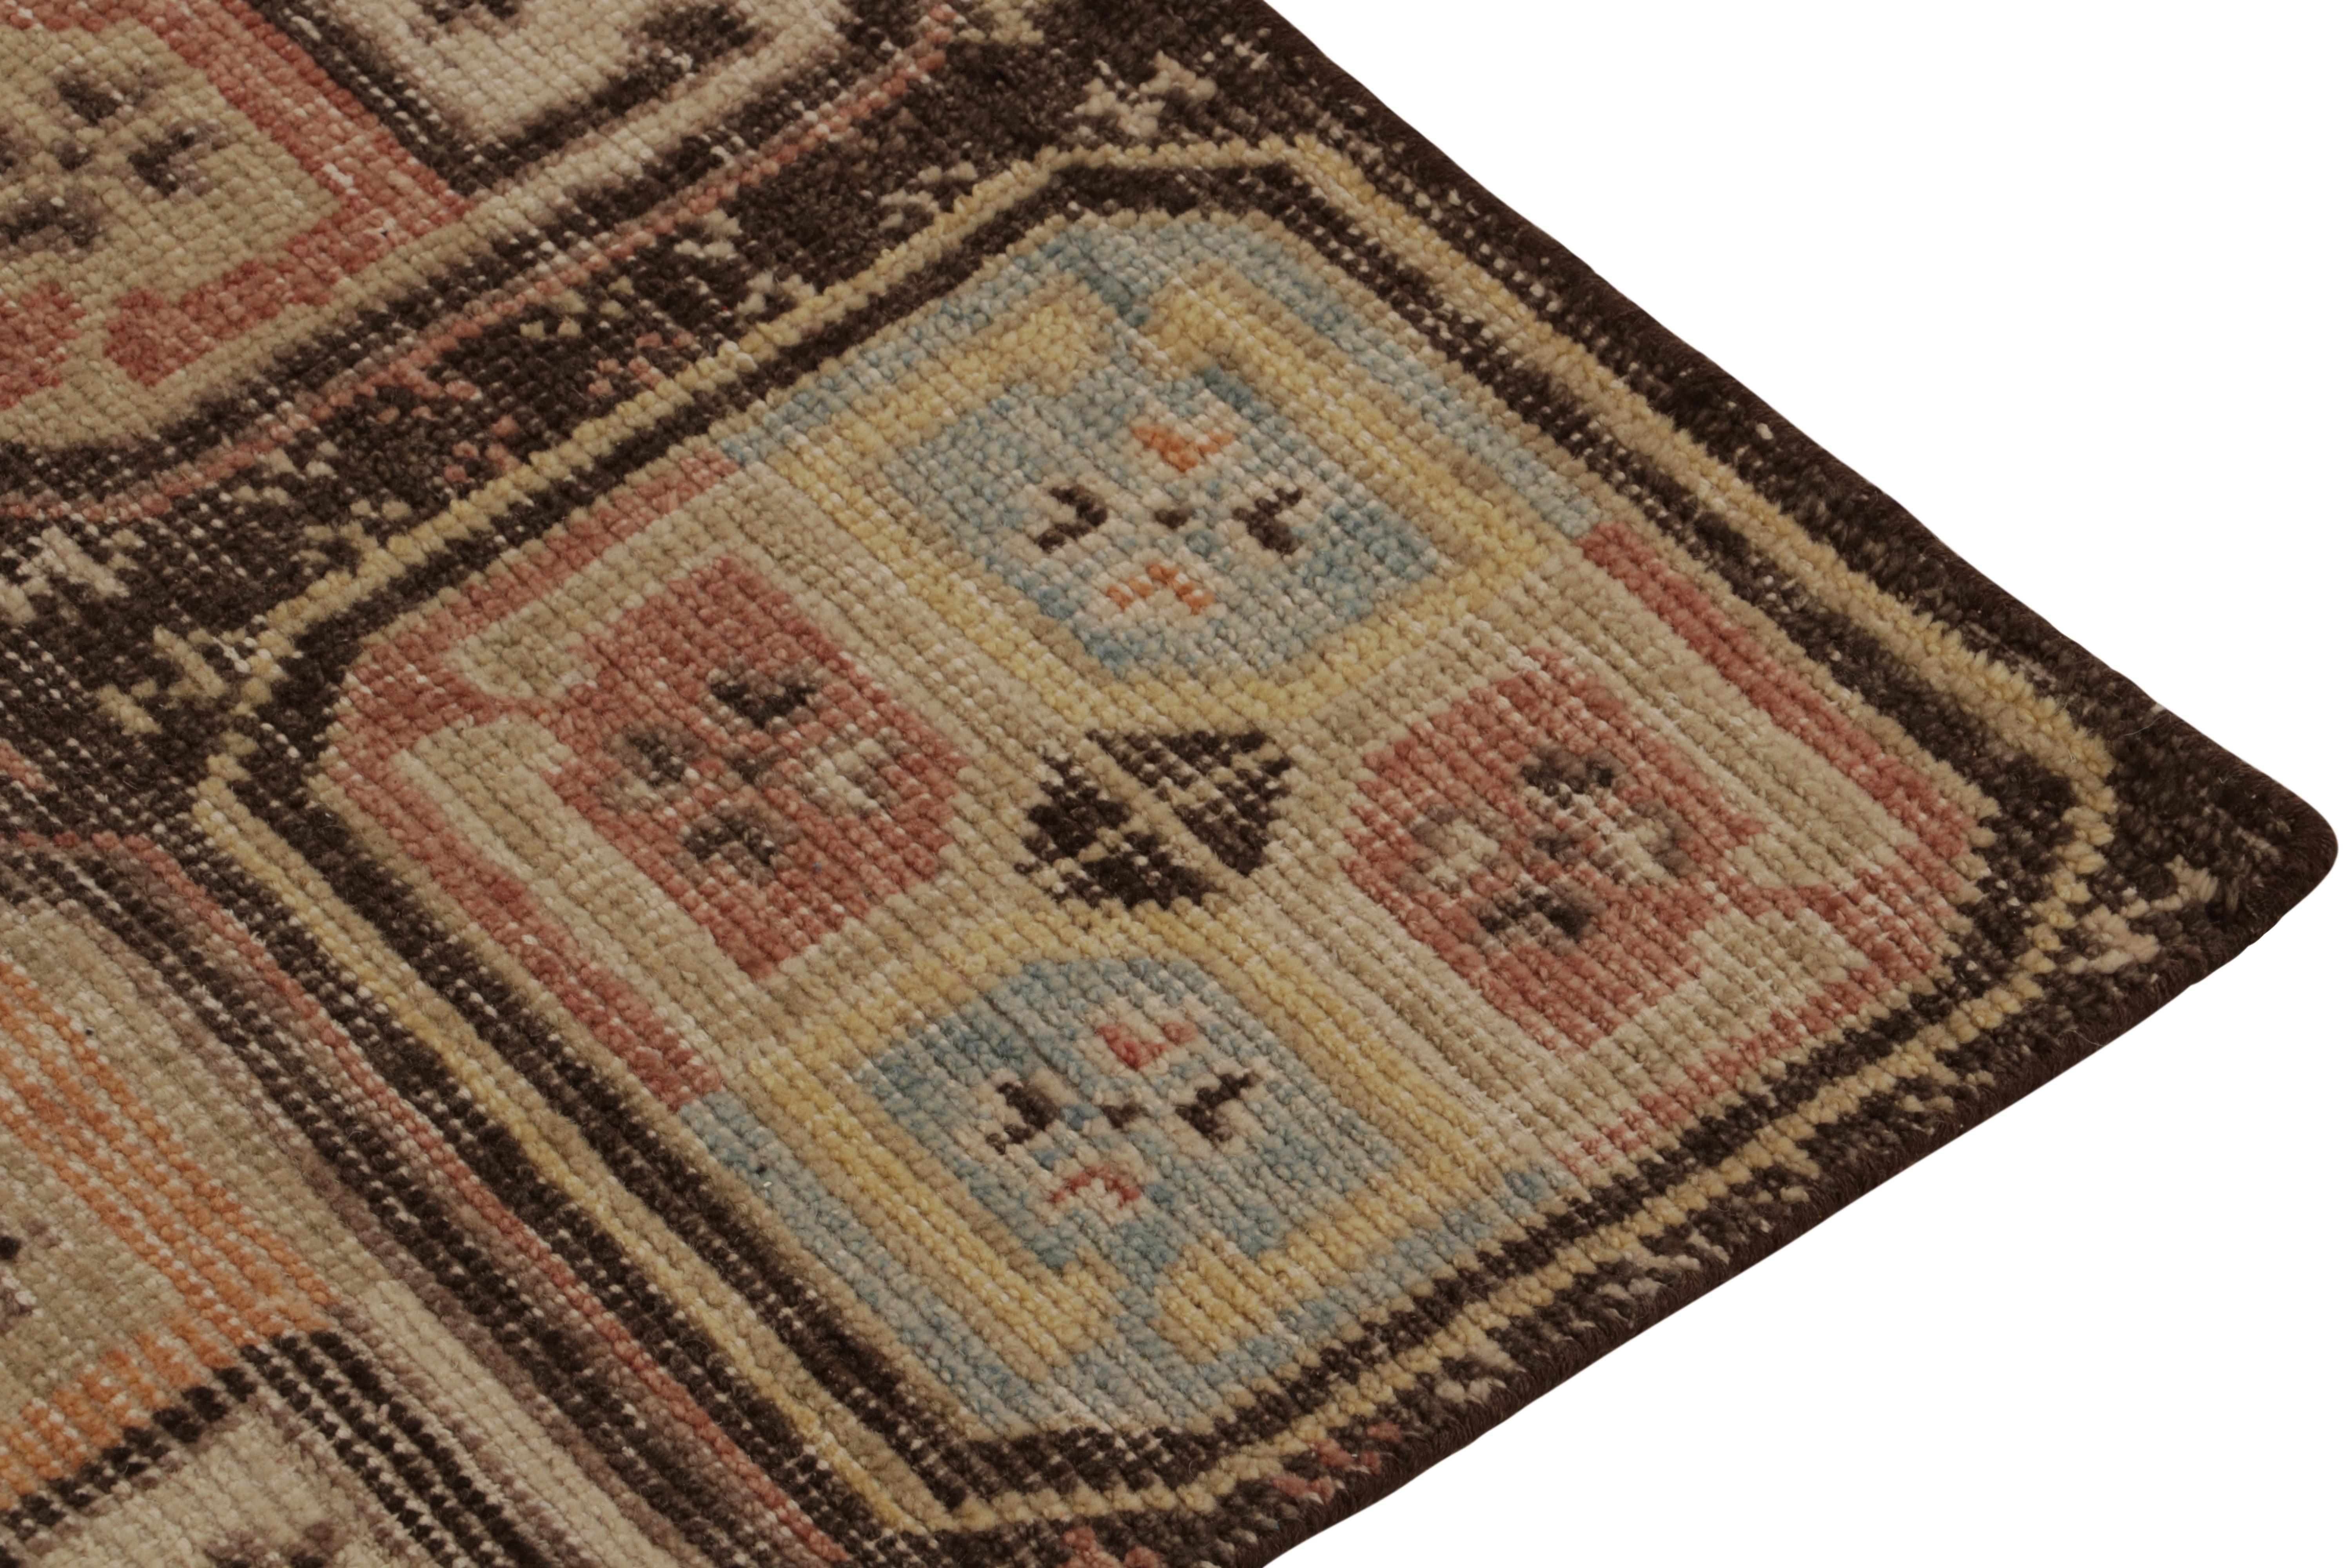 Rug & Kilim’s Distressed Tribal Style Runner in Beige-Brown & Colorful Emblems In New Condition For Sale In Long Island City, NY